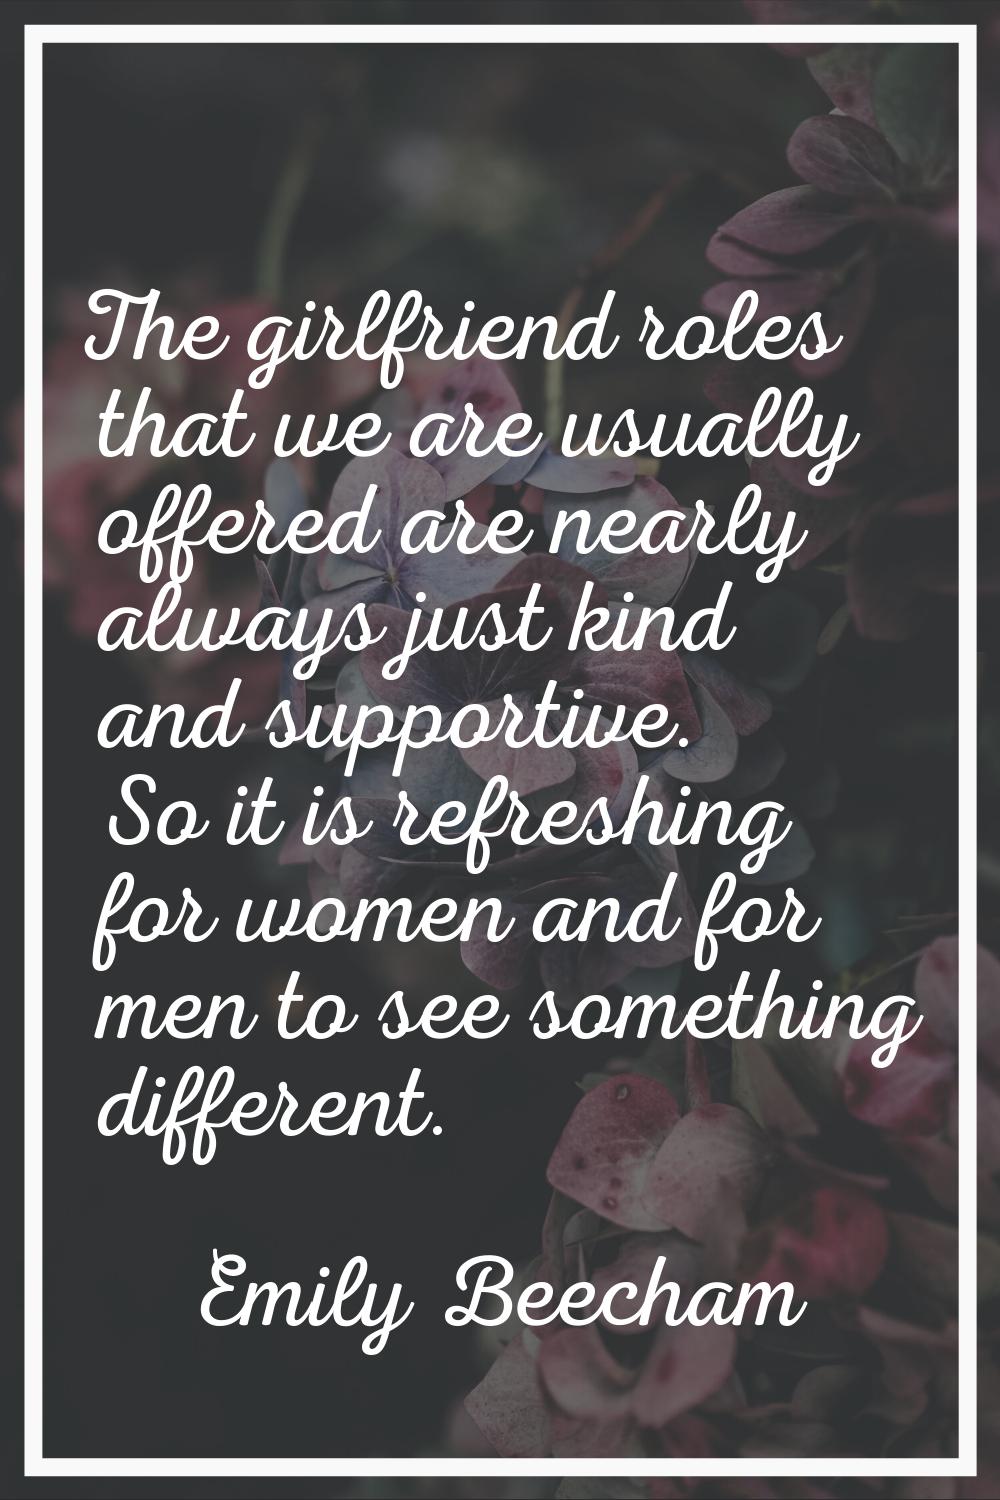 The girlfriend roles that we are usually offered are nearly always just kind and supportive. So it 